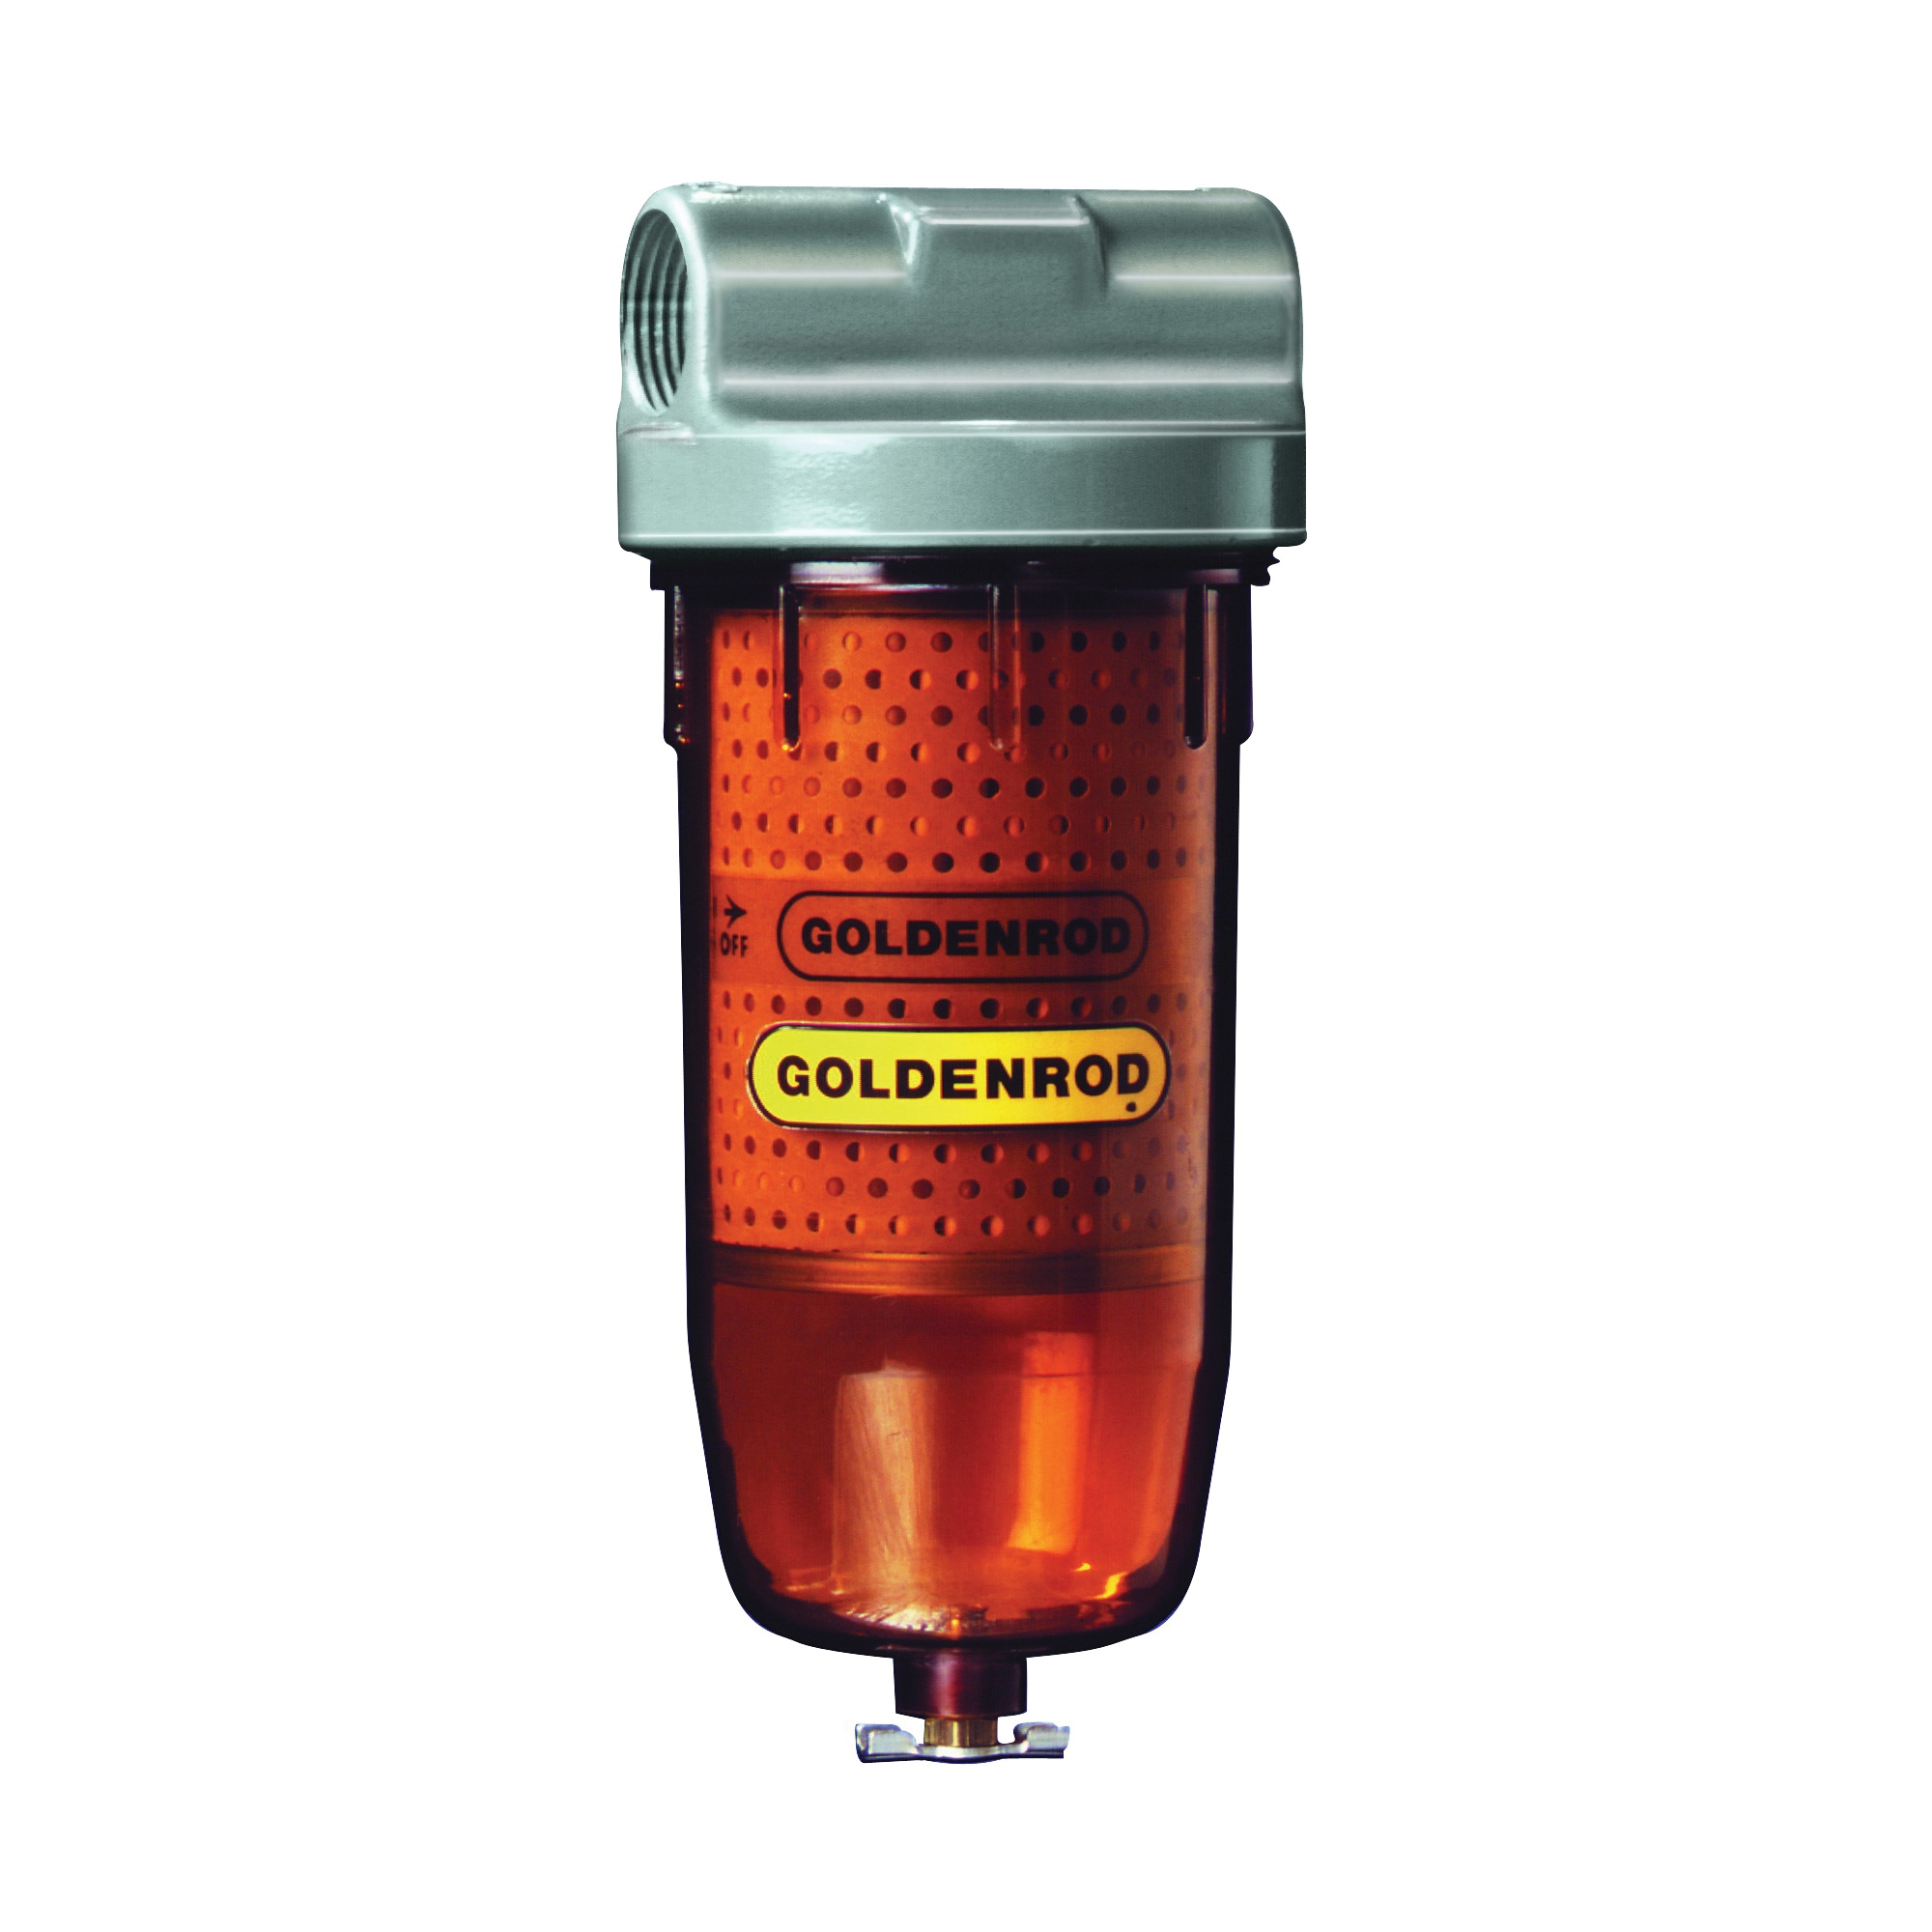 Goldenrod 495 Fuel Filter, 1 in Connection, NPT, 25 gpm